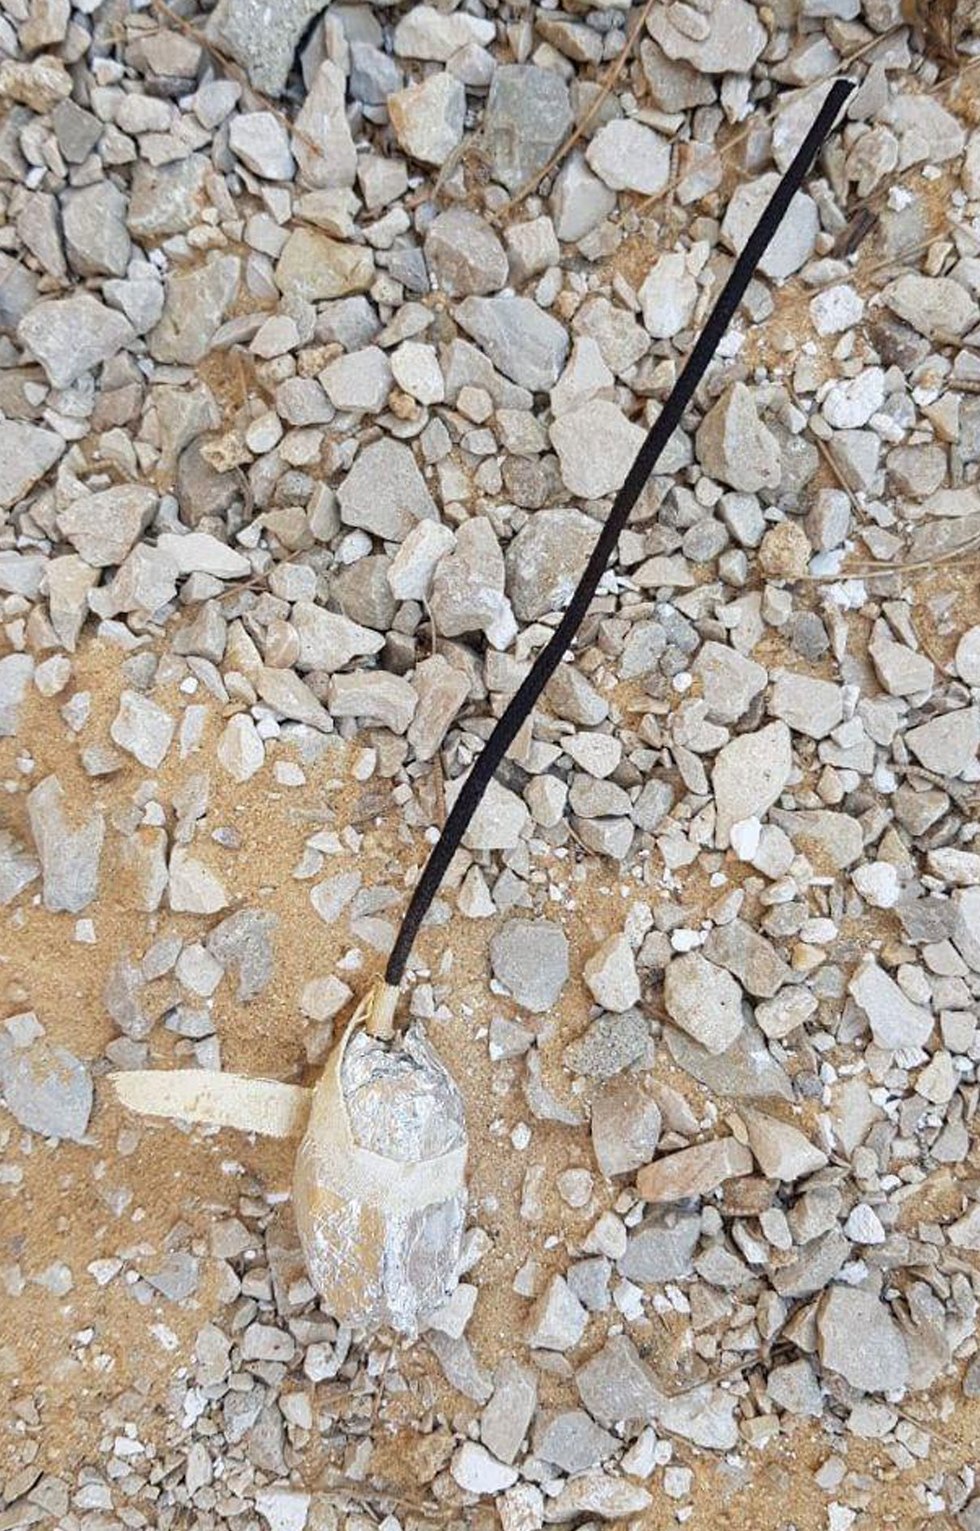 Incendiary device which was attacked to kite found in Kissufim forest